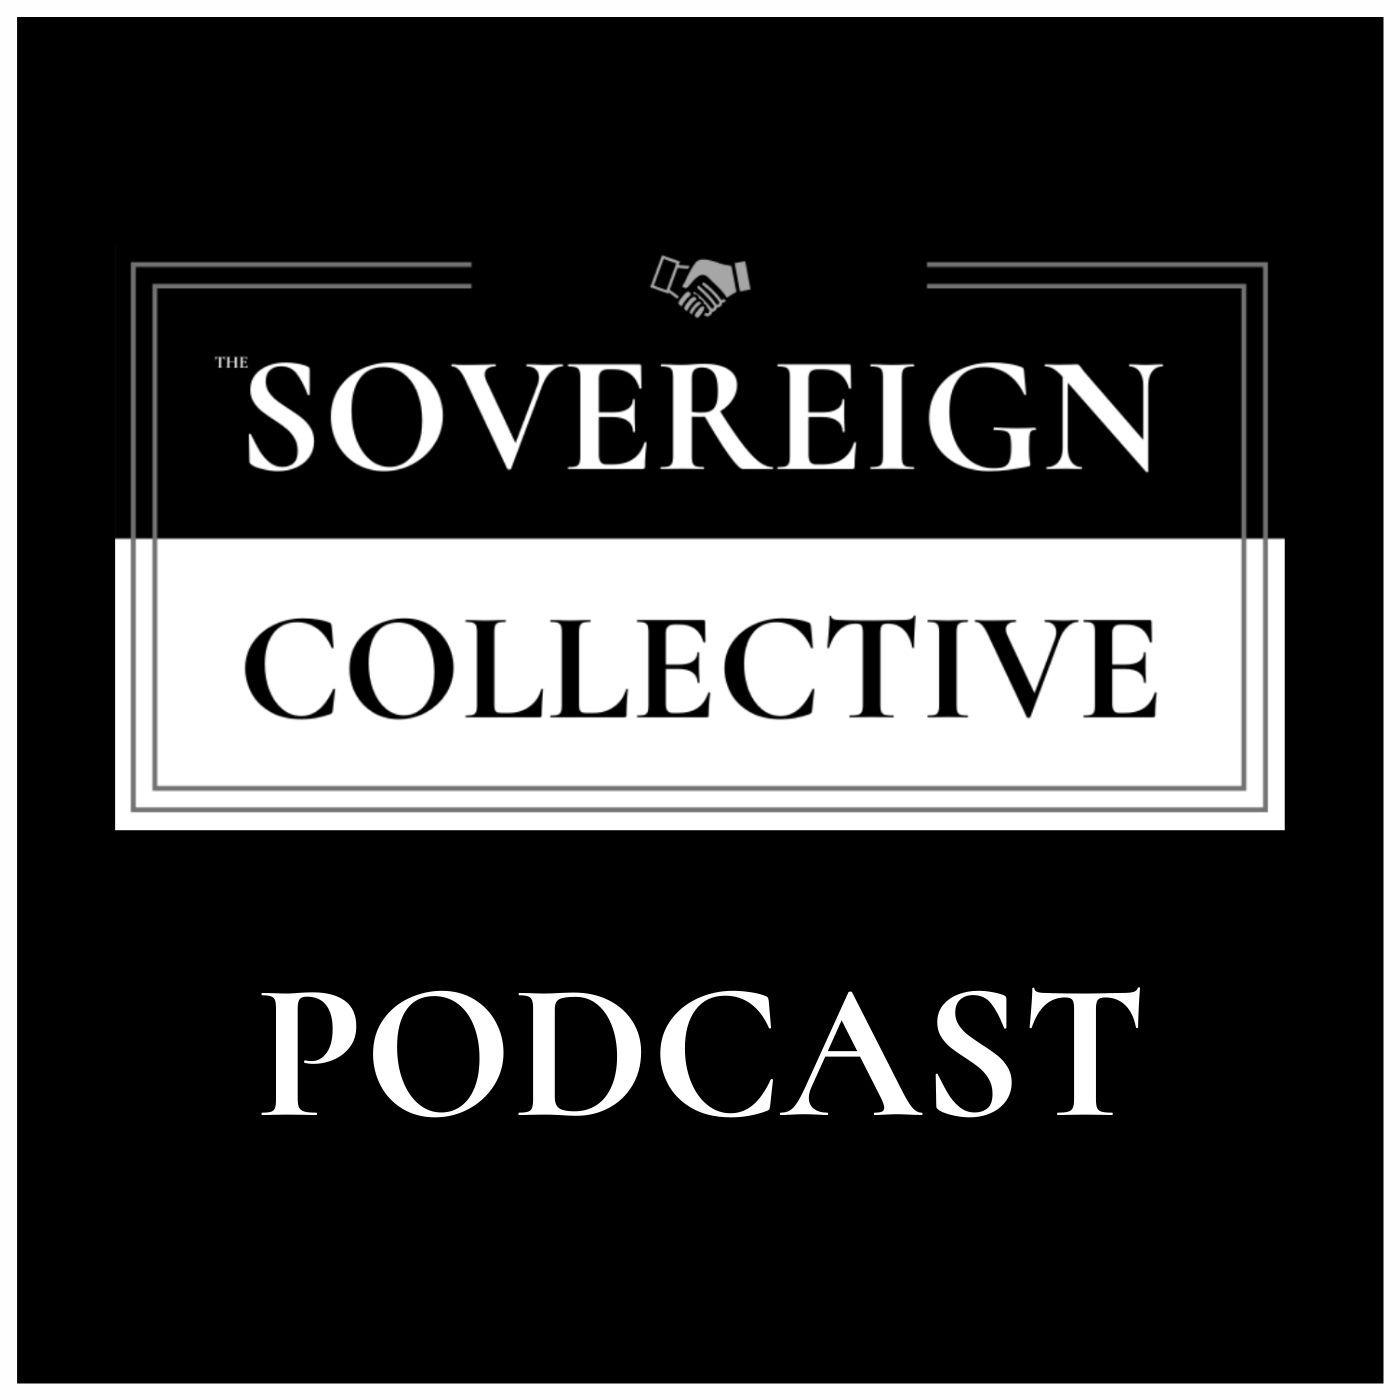 The Sovereign Collective